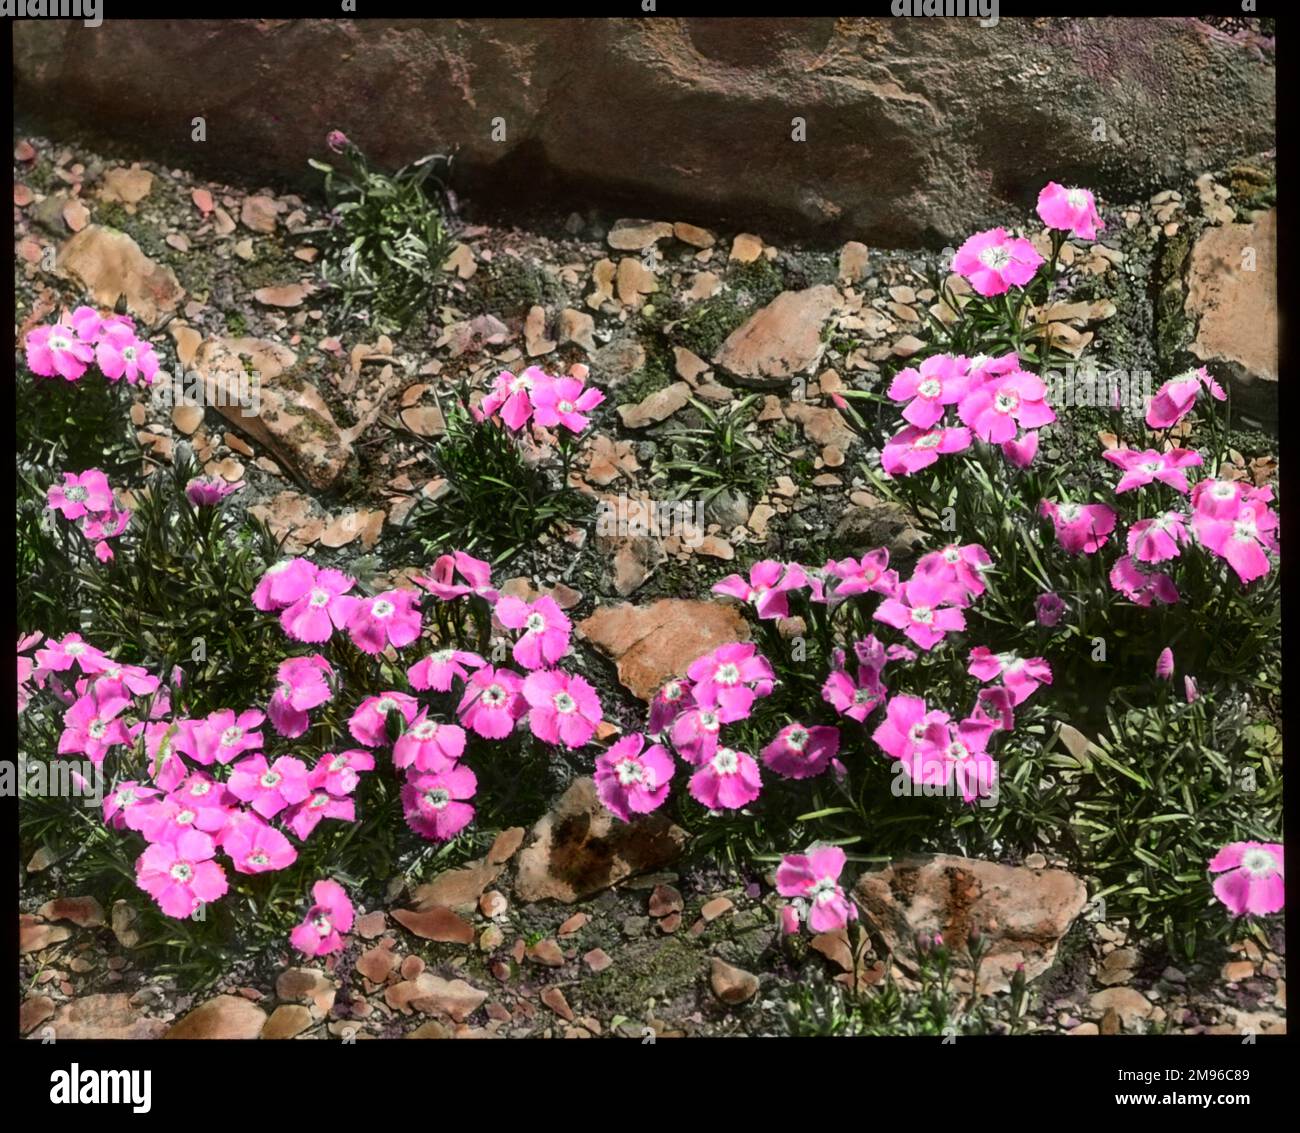 Dianthus Alpinus (Alpine Pink), a perennial flowering plant of the Caryophyllaceae family.  Seen here growing in a rocky setting. Stock Photo